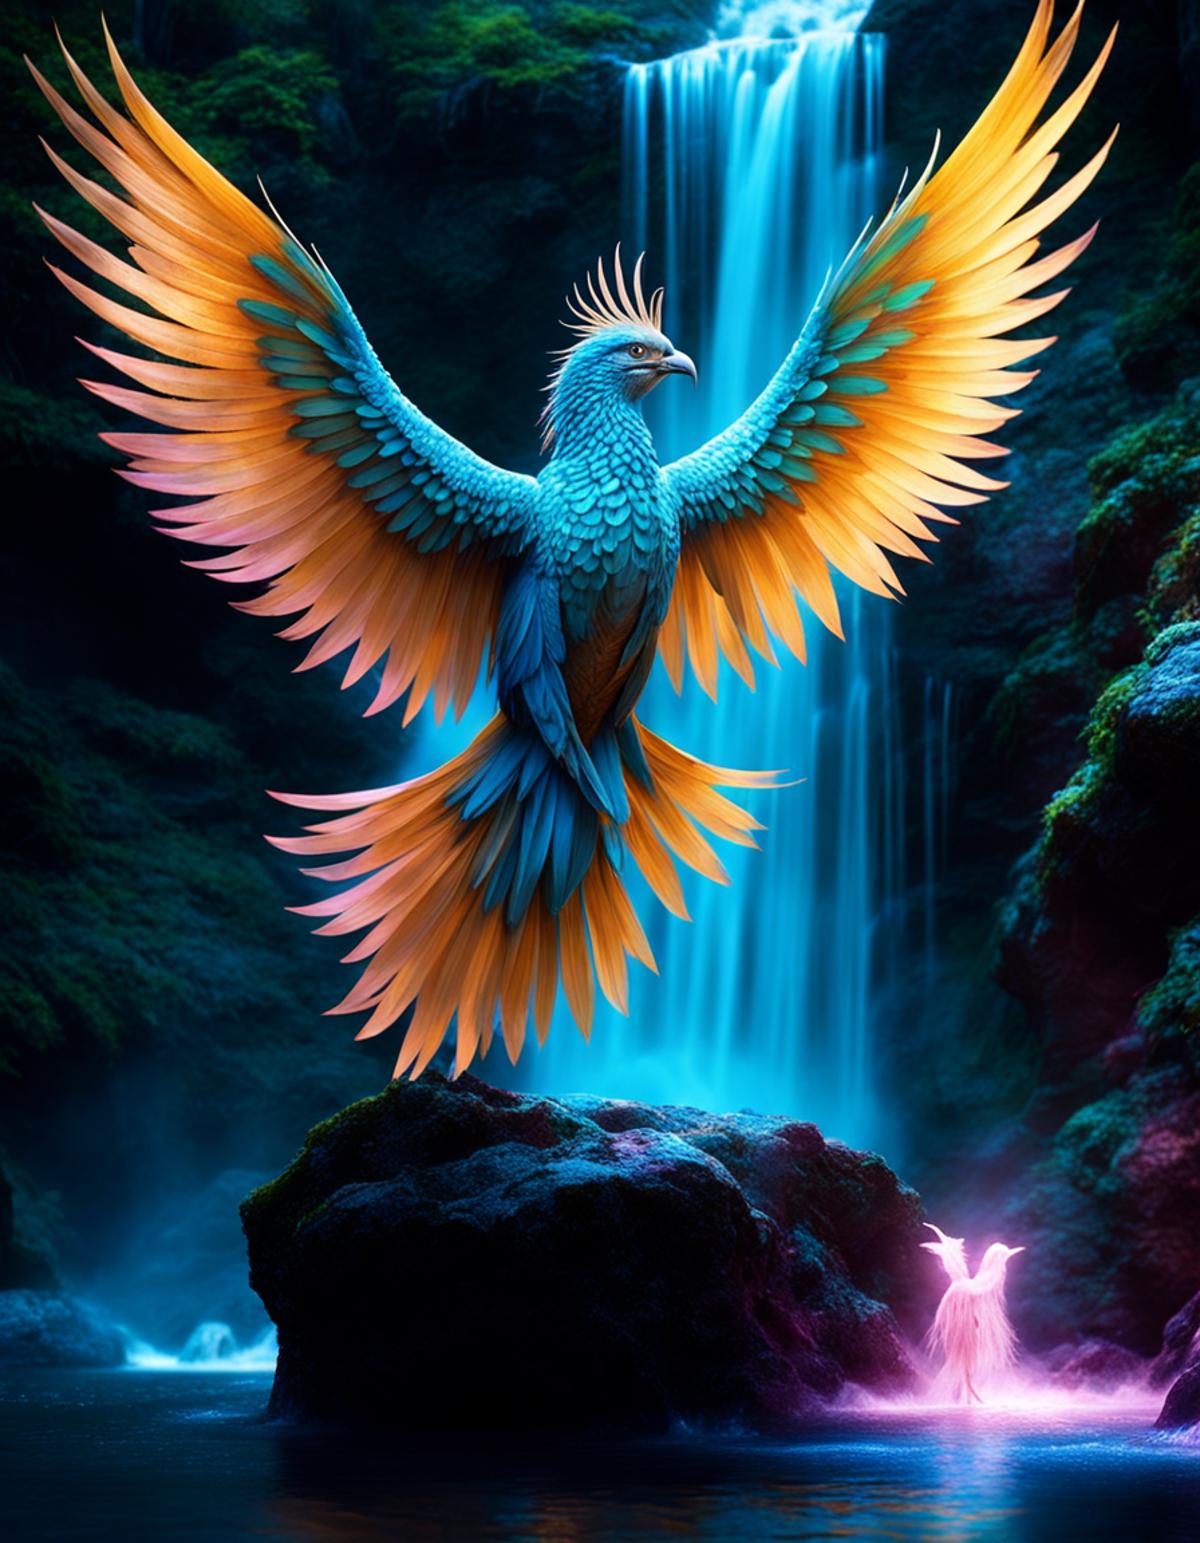 A colorful bird with blue and orange wings spread out in front of a waterfall.